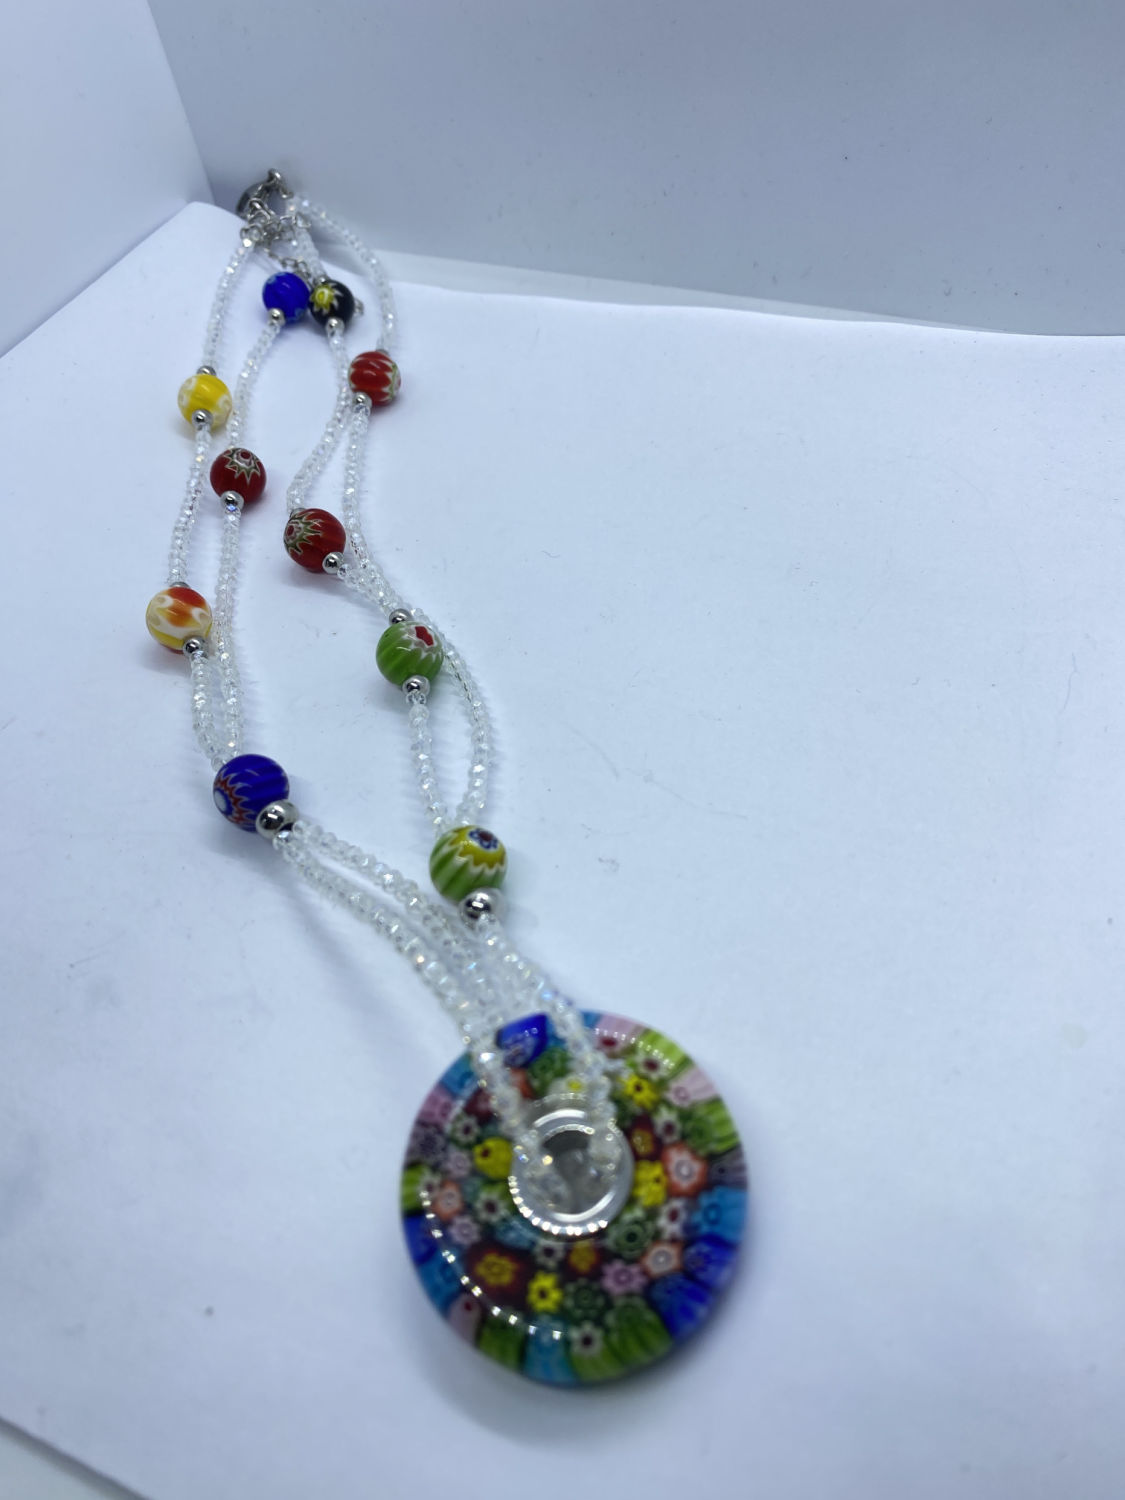 GORGEOUS PATTERNED SPARKLY MURANO GLASS NECKLACE APPROX. 18' LONG